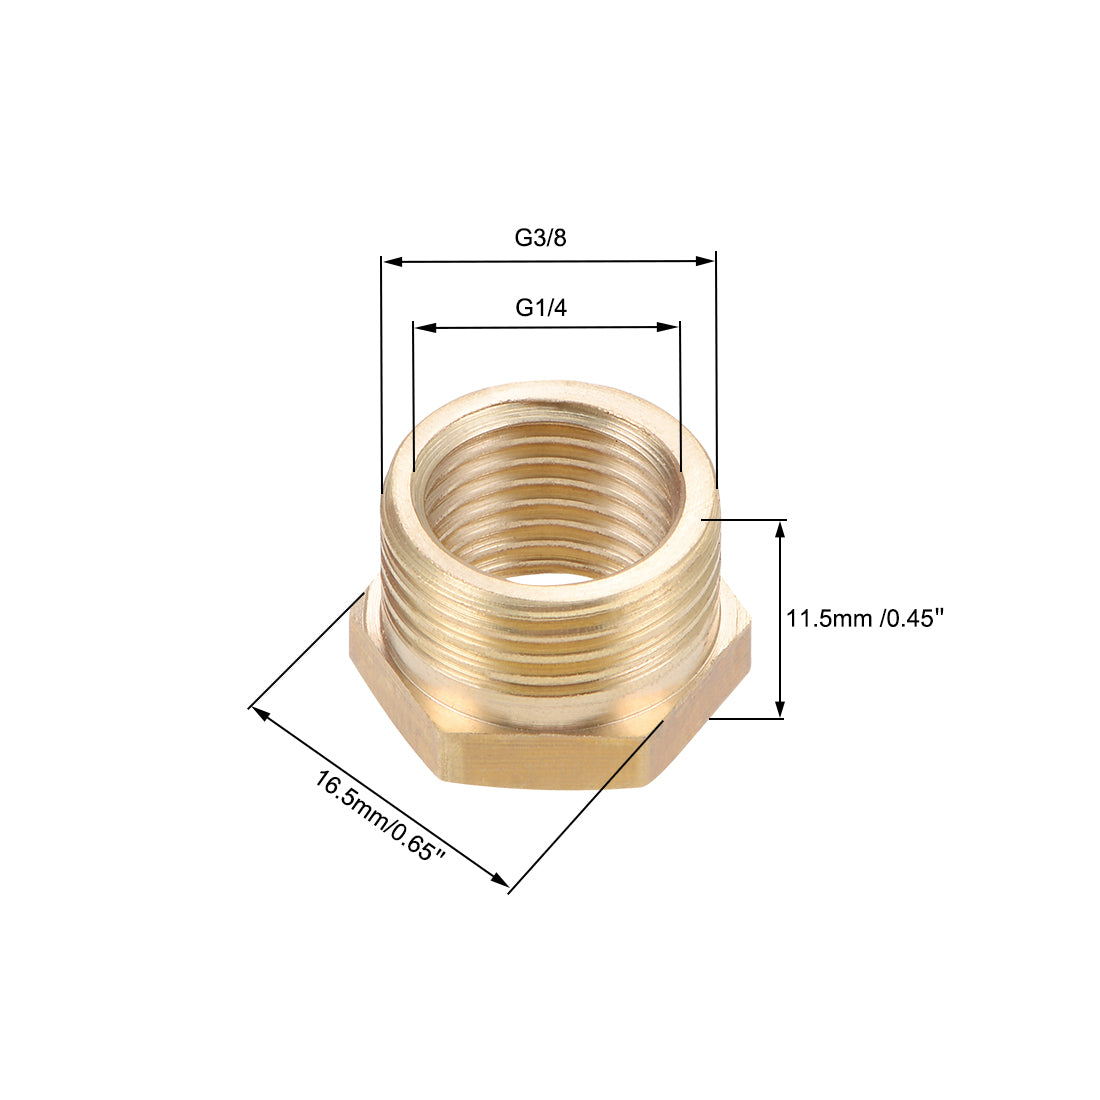 uxcell Uxcell Brass Threaded Pipe Fitting G3/8 Male x G1/4 Female Hex Bushing Adapter 3pcs